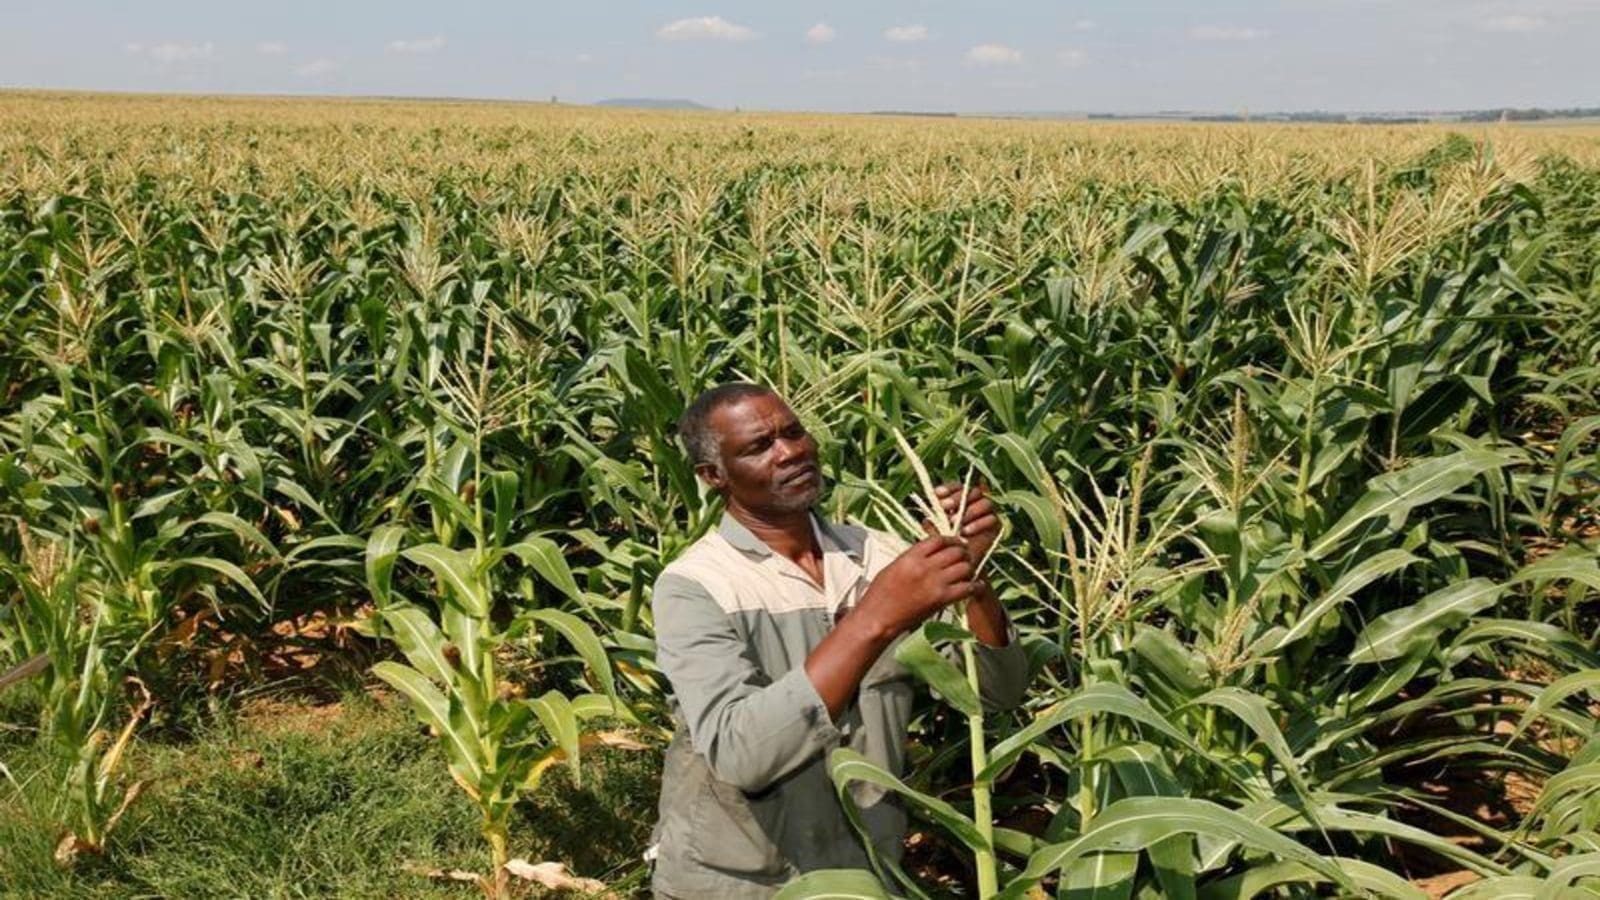 South Africa’s planted corn area stifled by high input cost environment